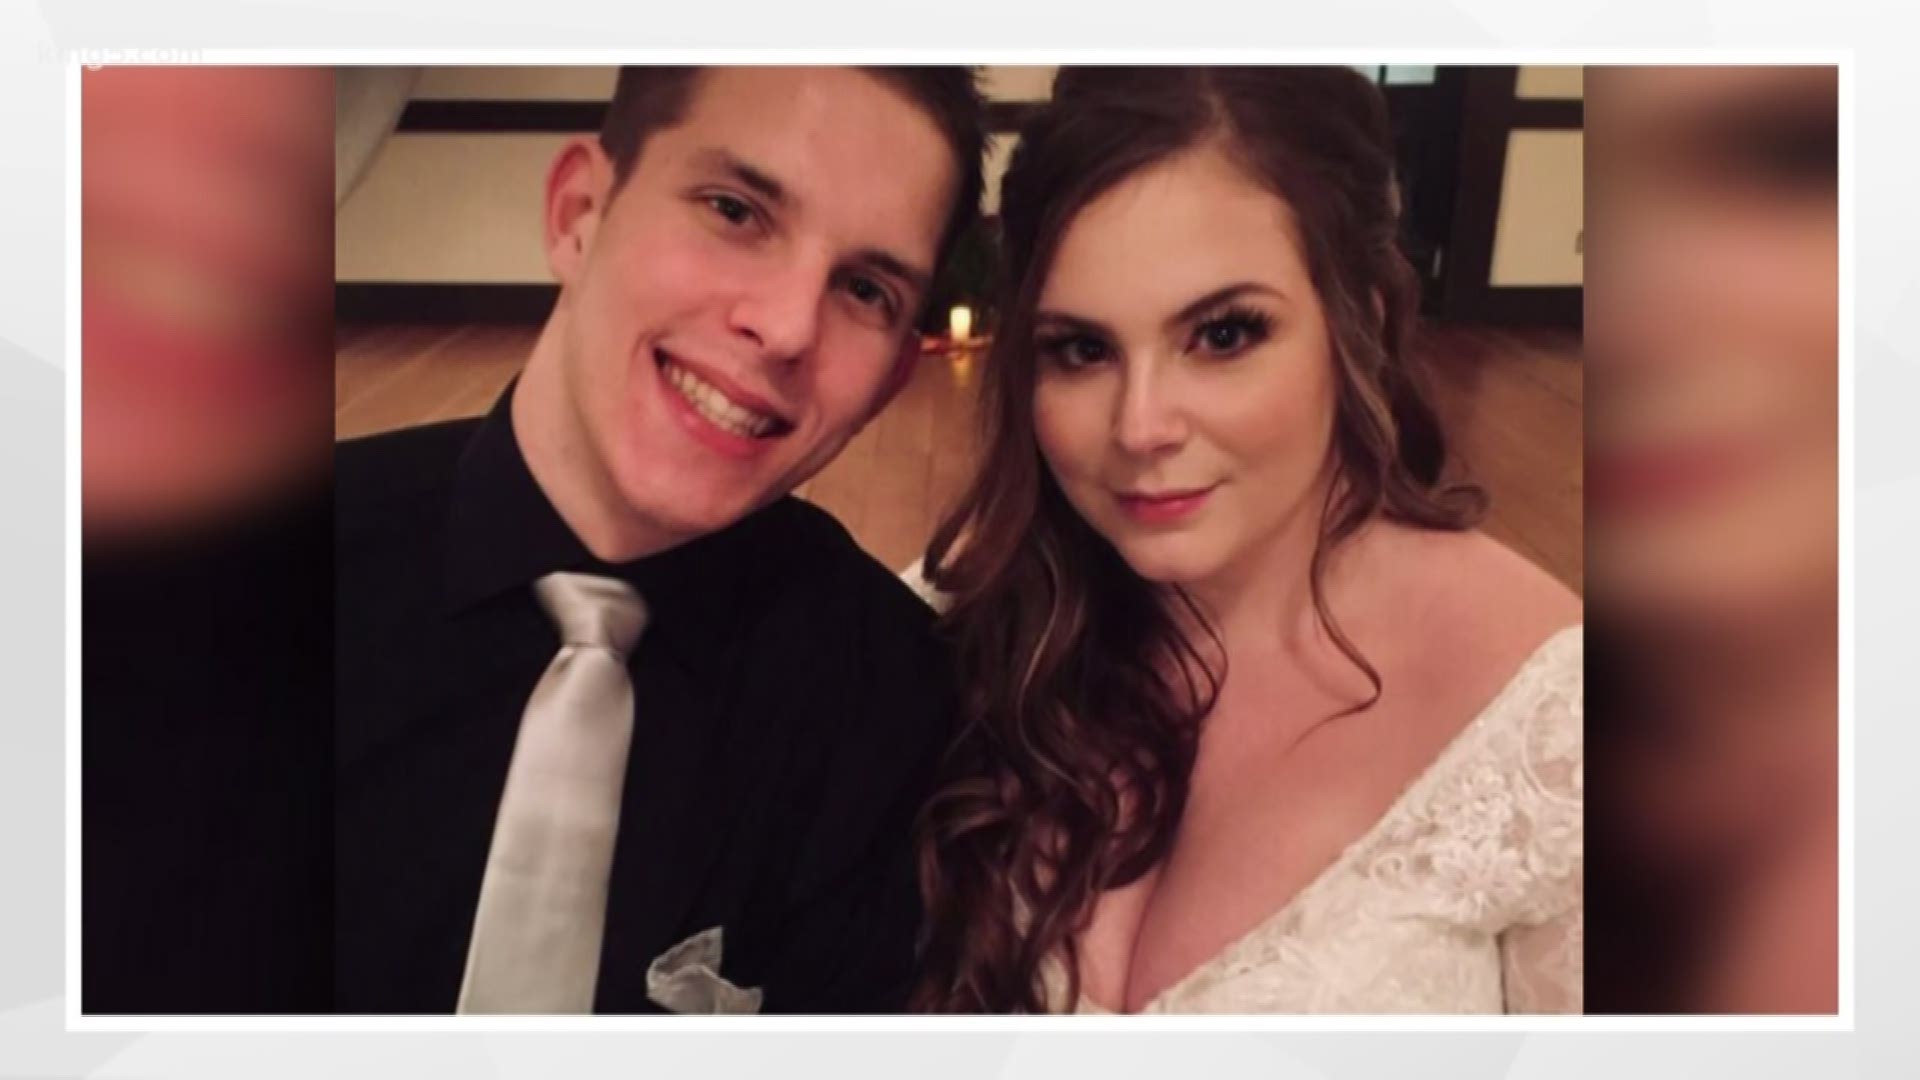 The bride wound up receiving dozens of Venmo donations after a stranger posted a wrong-number text conversation.